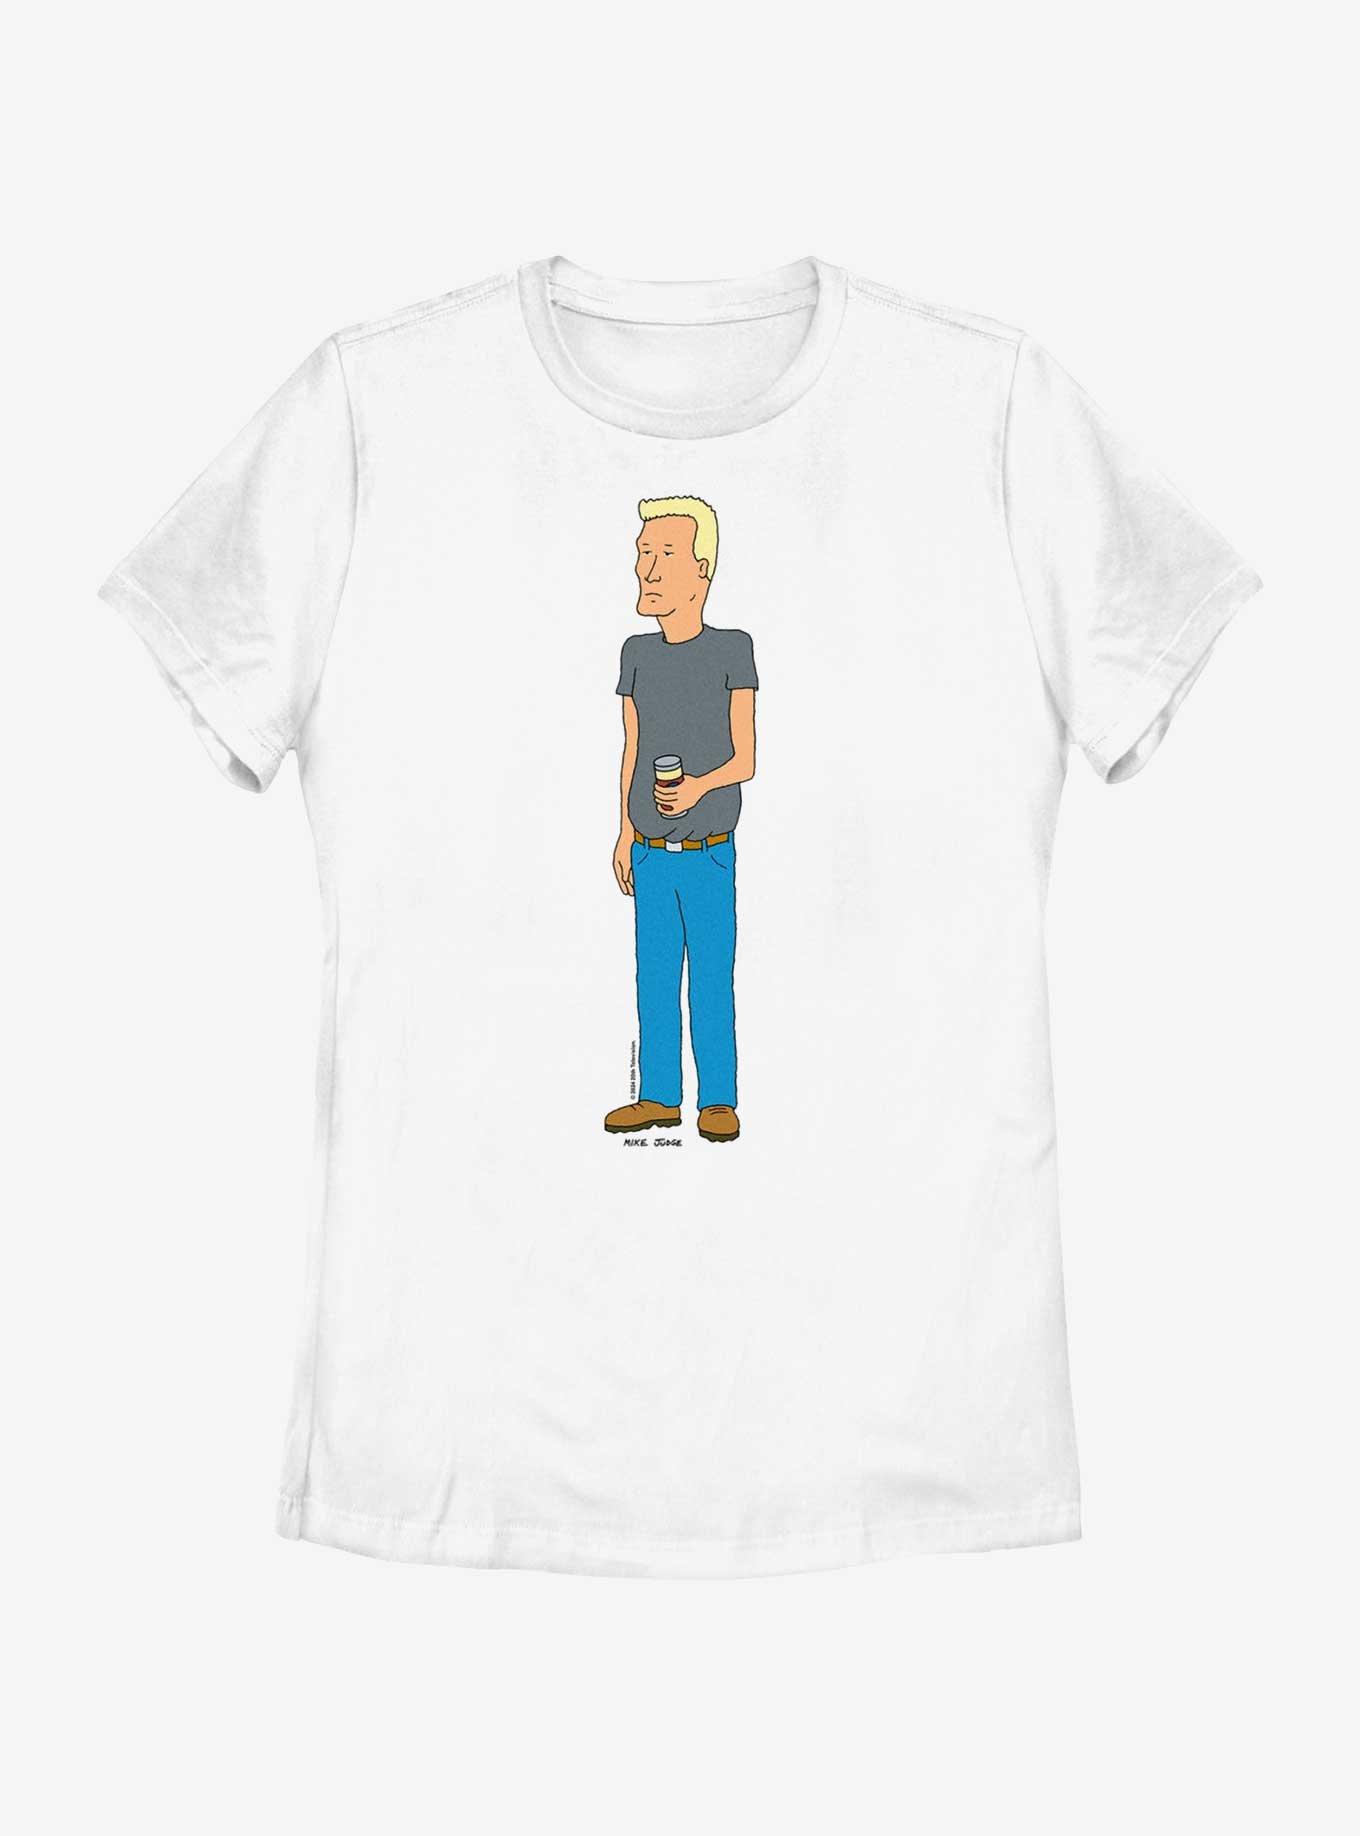 King of the Hill Boomhauer Women's T-Shirt, WHITE, hi-res